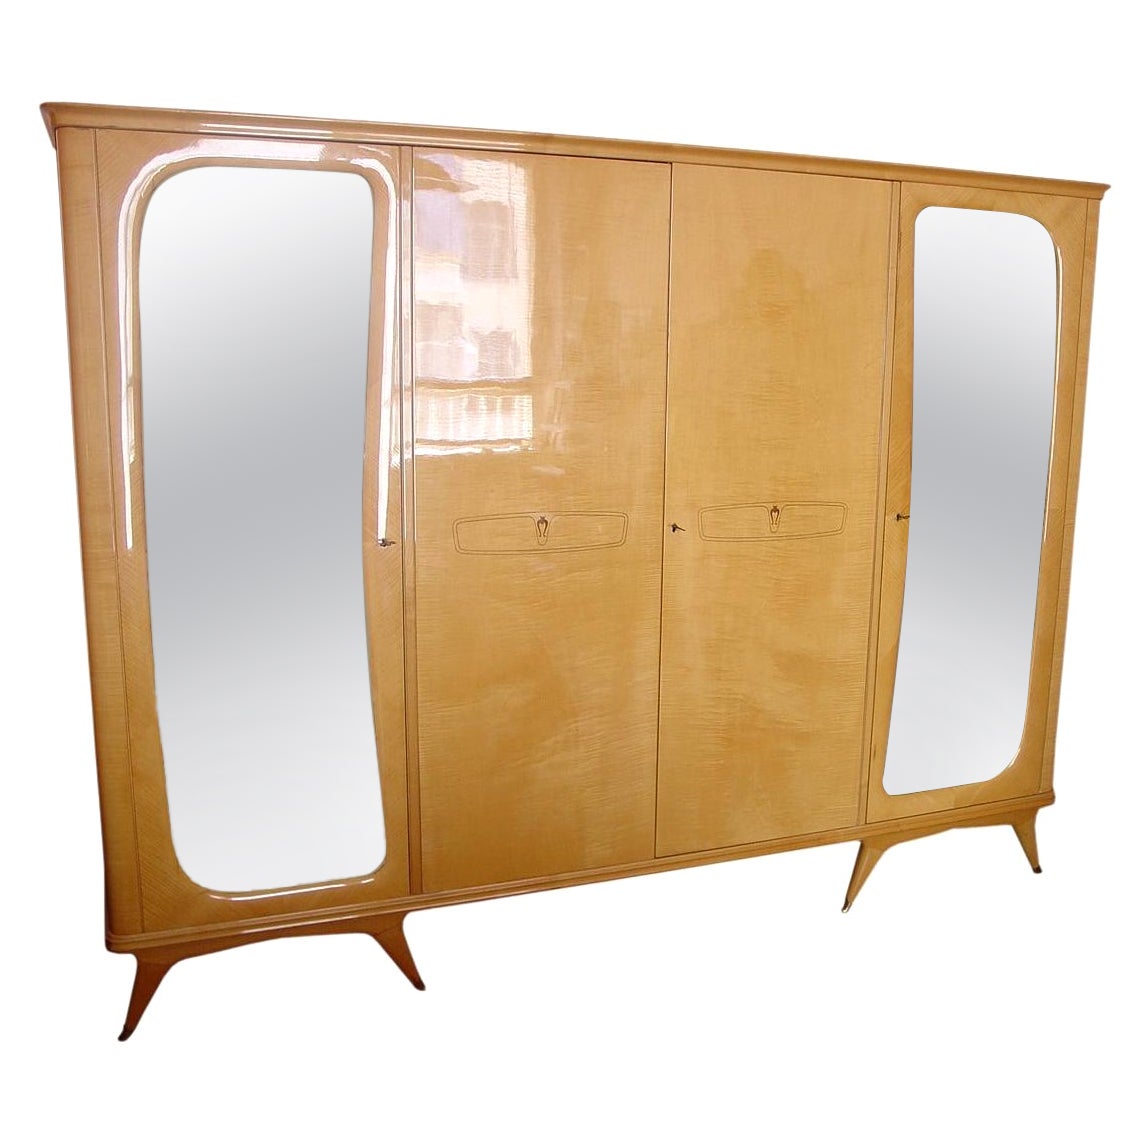 Vintage Wardrobe Maple Feather Attributed to Borsani Osvaldo, Italy, Approx 1950 For Sale